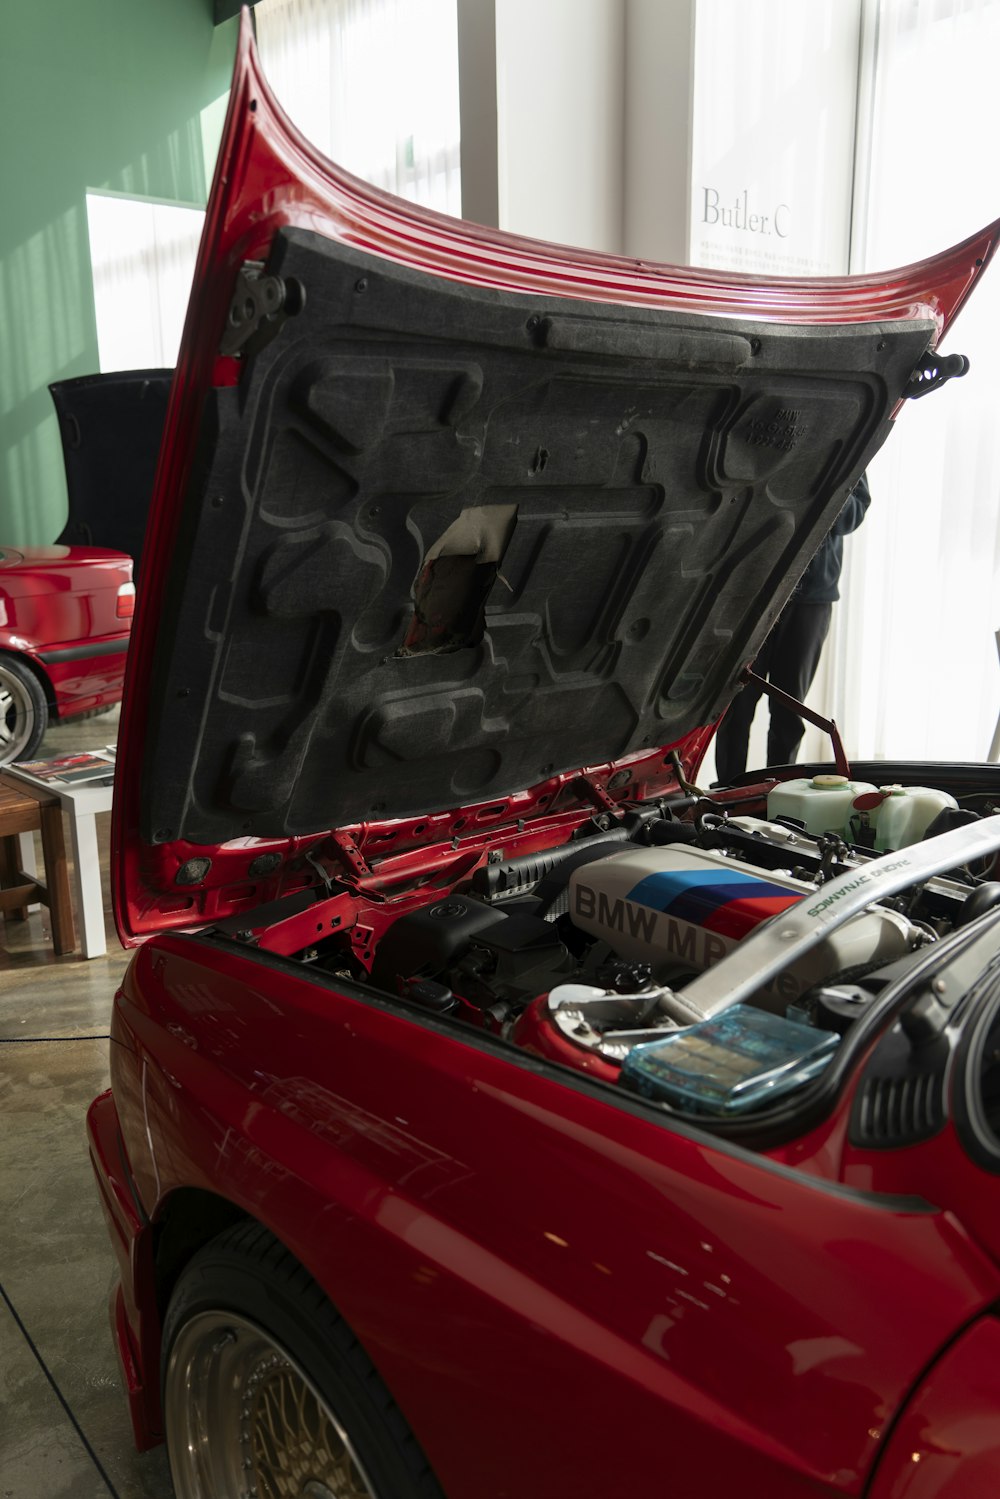 a red car with its hood open in a garage